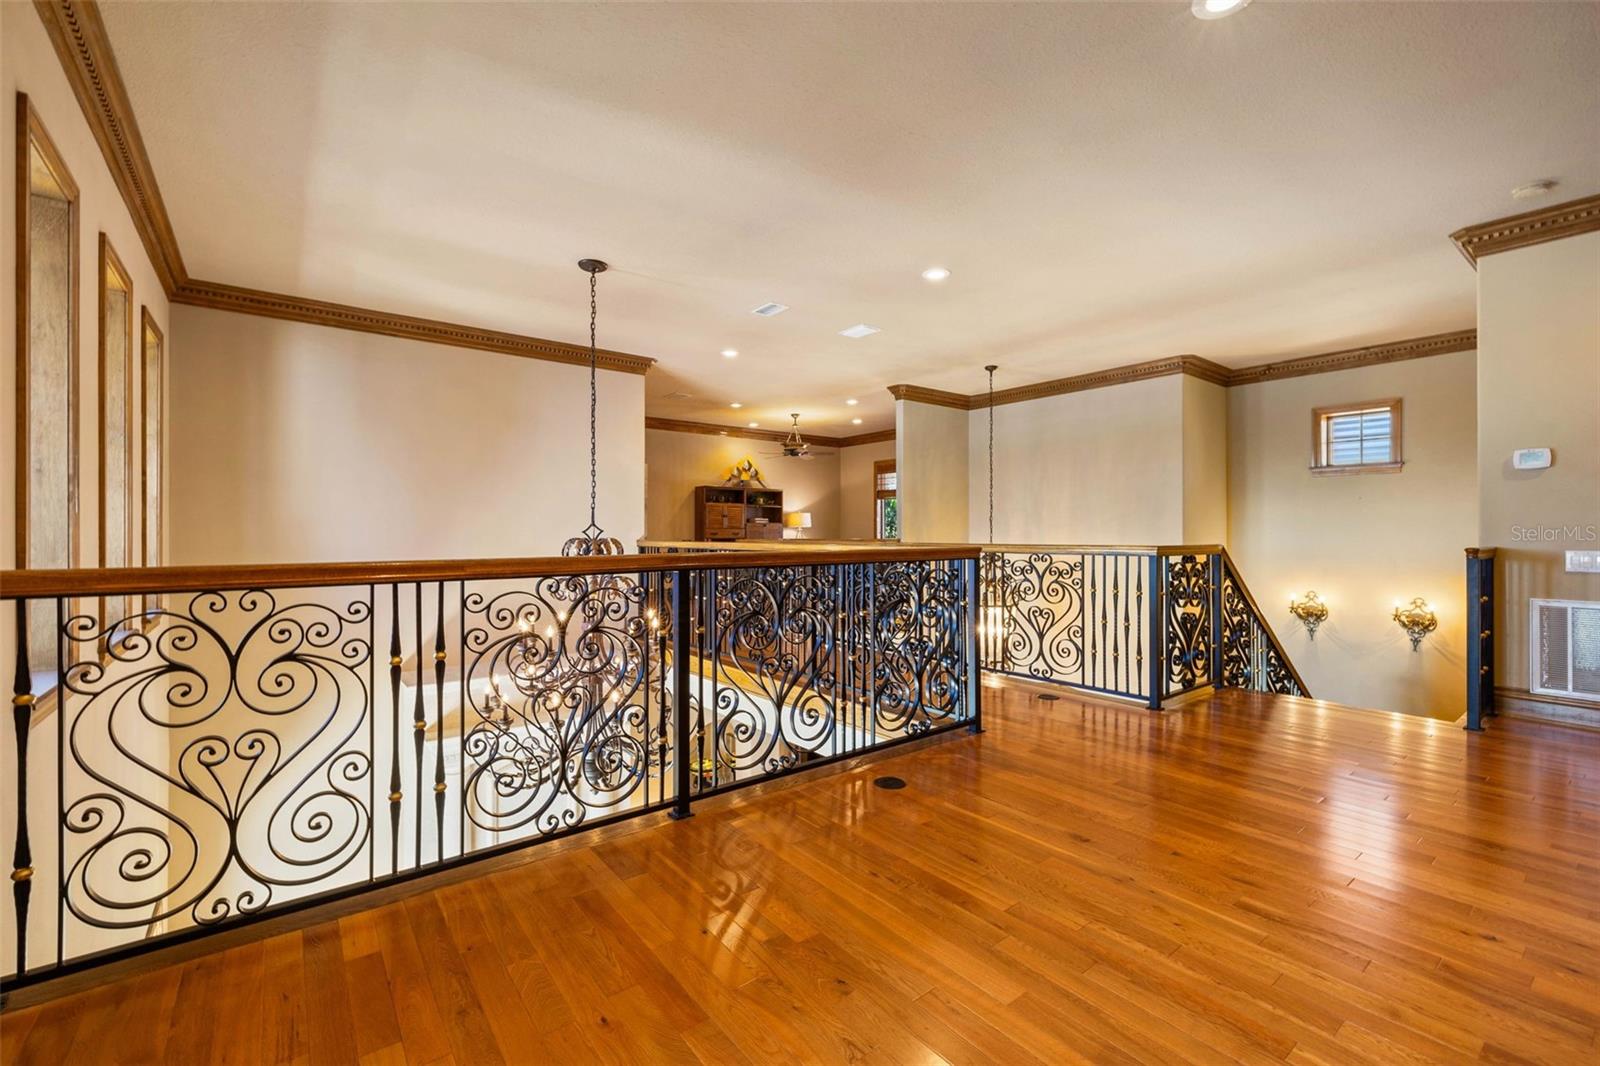 Upstairs Open Loft areas with detailed handrailing